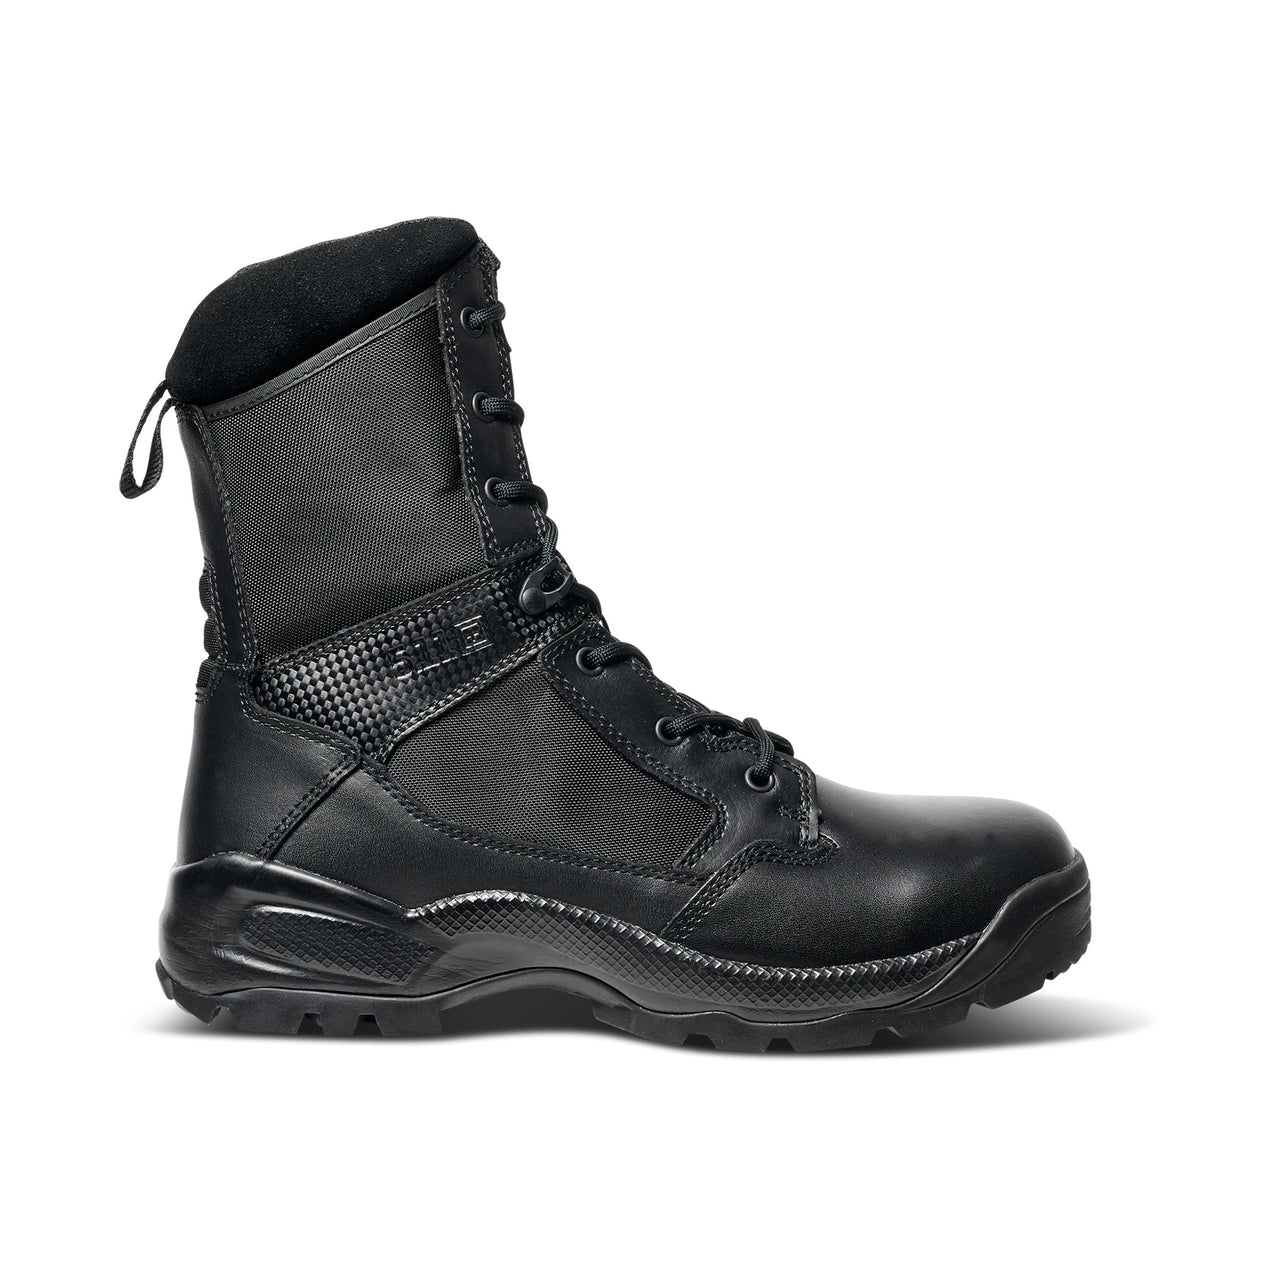 5.11 Tactical A.T.A.C.® 2.0 8" Shield Boot (12391) | The Fire Center | Fuego Fire Center | Firefighter Gear | The Fire Store | The boot worn by the world's leading public safety personnel, the 5.11® A.T.A.C., just got promoted. It's lighter and more comfortable, yet maintains its reputation for toughness and durability.